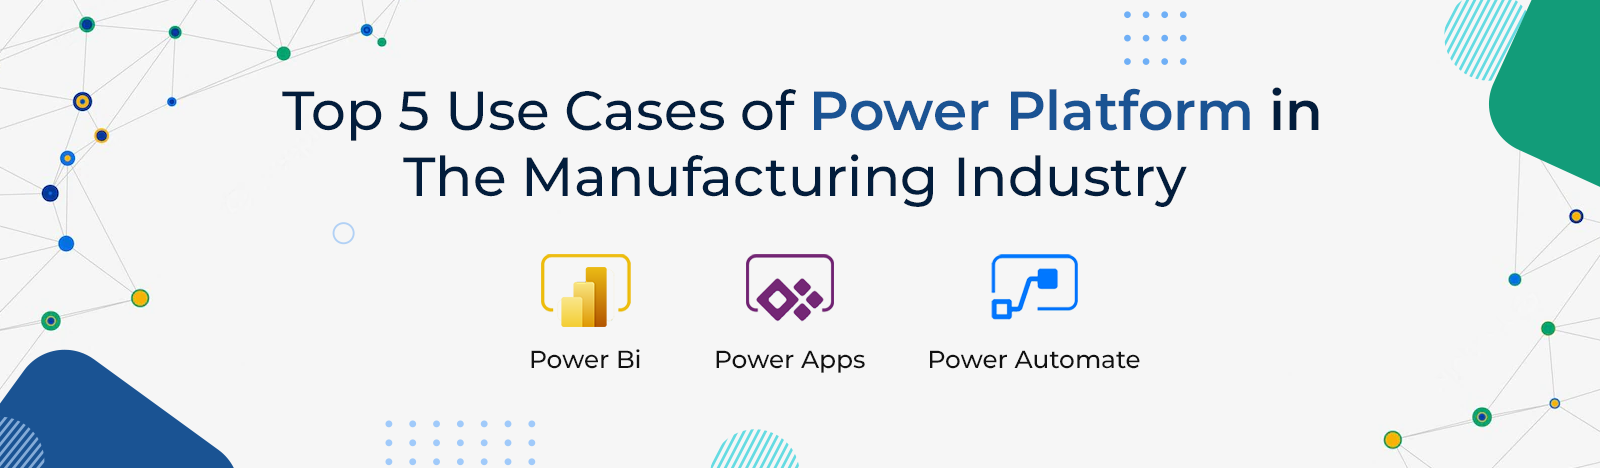 Power Platform Use Cases in The Manufacturing Industry